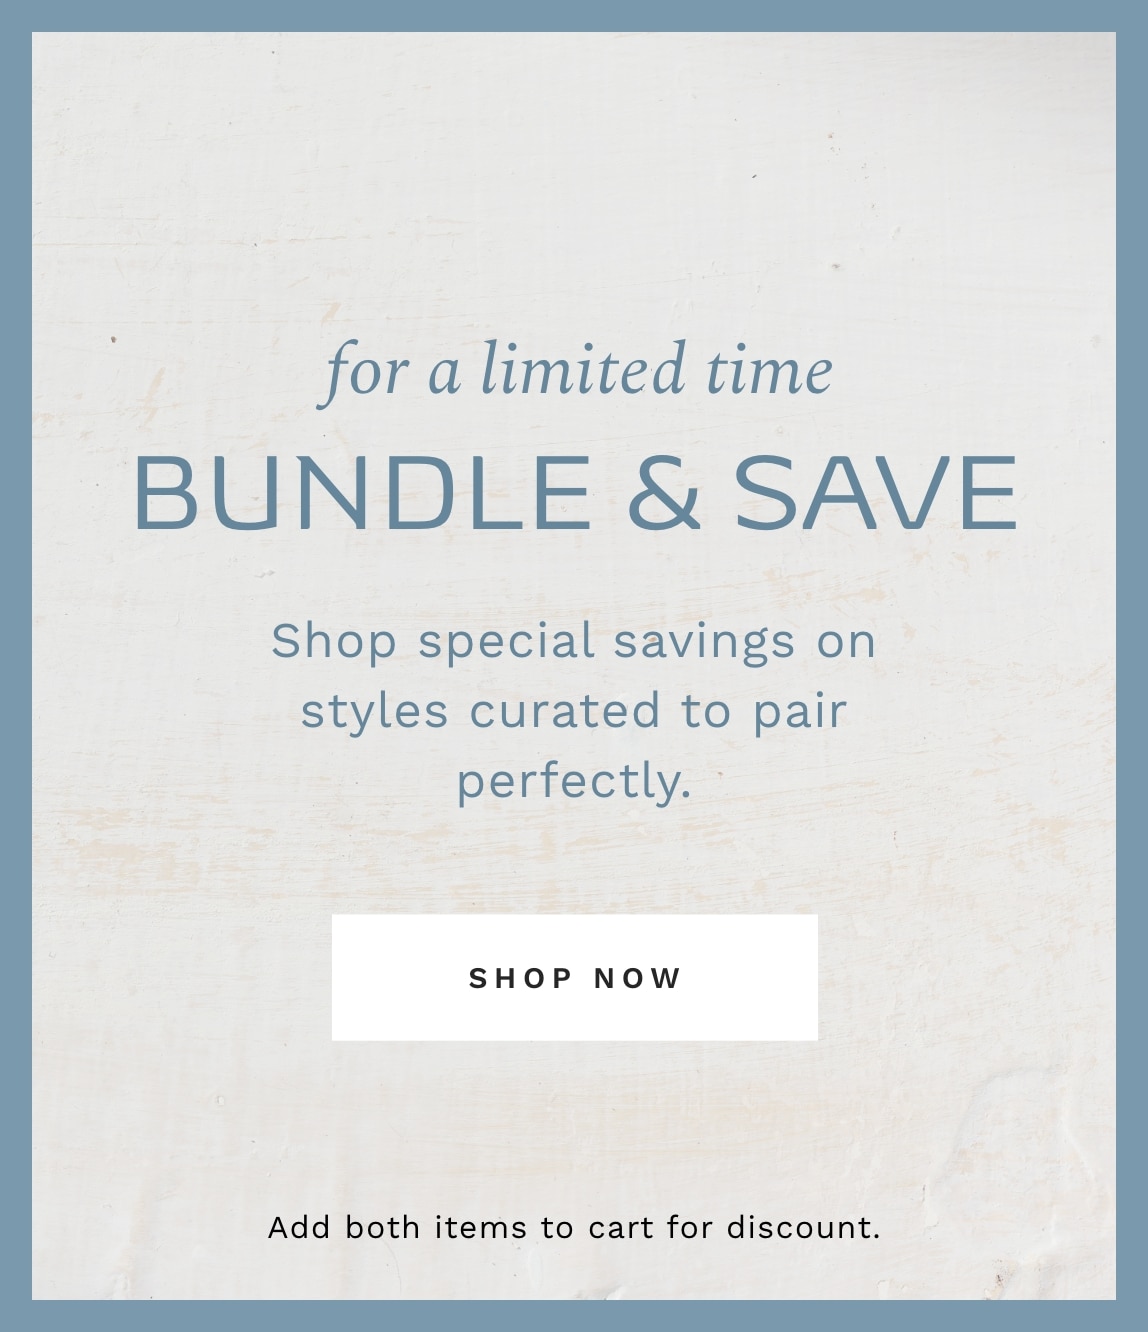 For A Limited Time BUNDLE & SAVE. Shop special savings on styles curated to pair perfectly. Add both items to cart for discount.